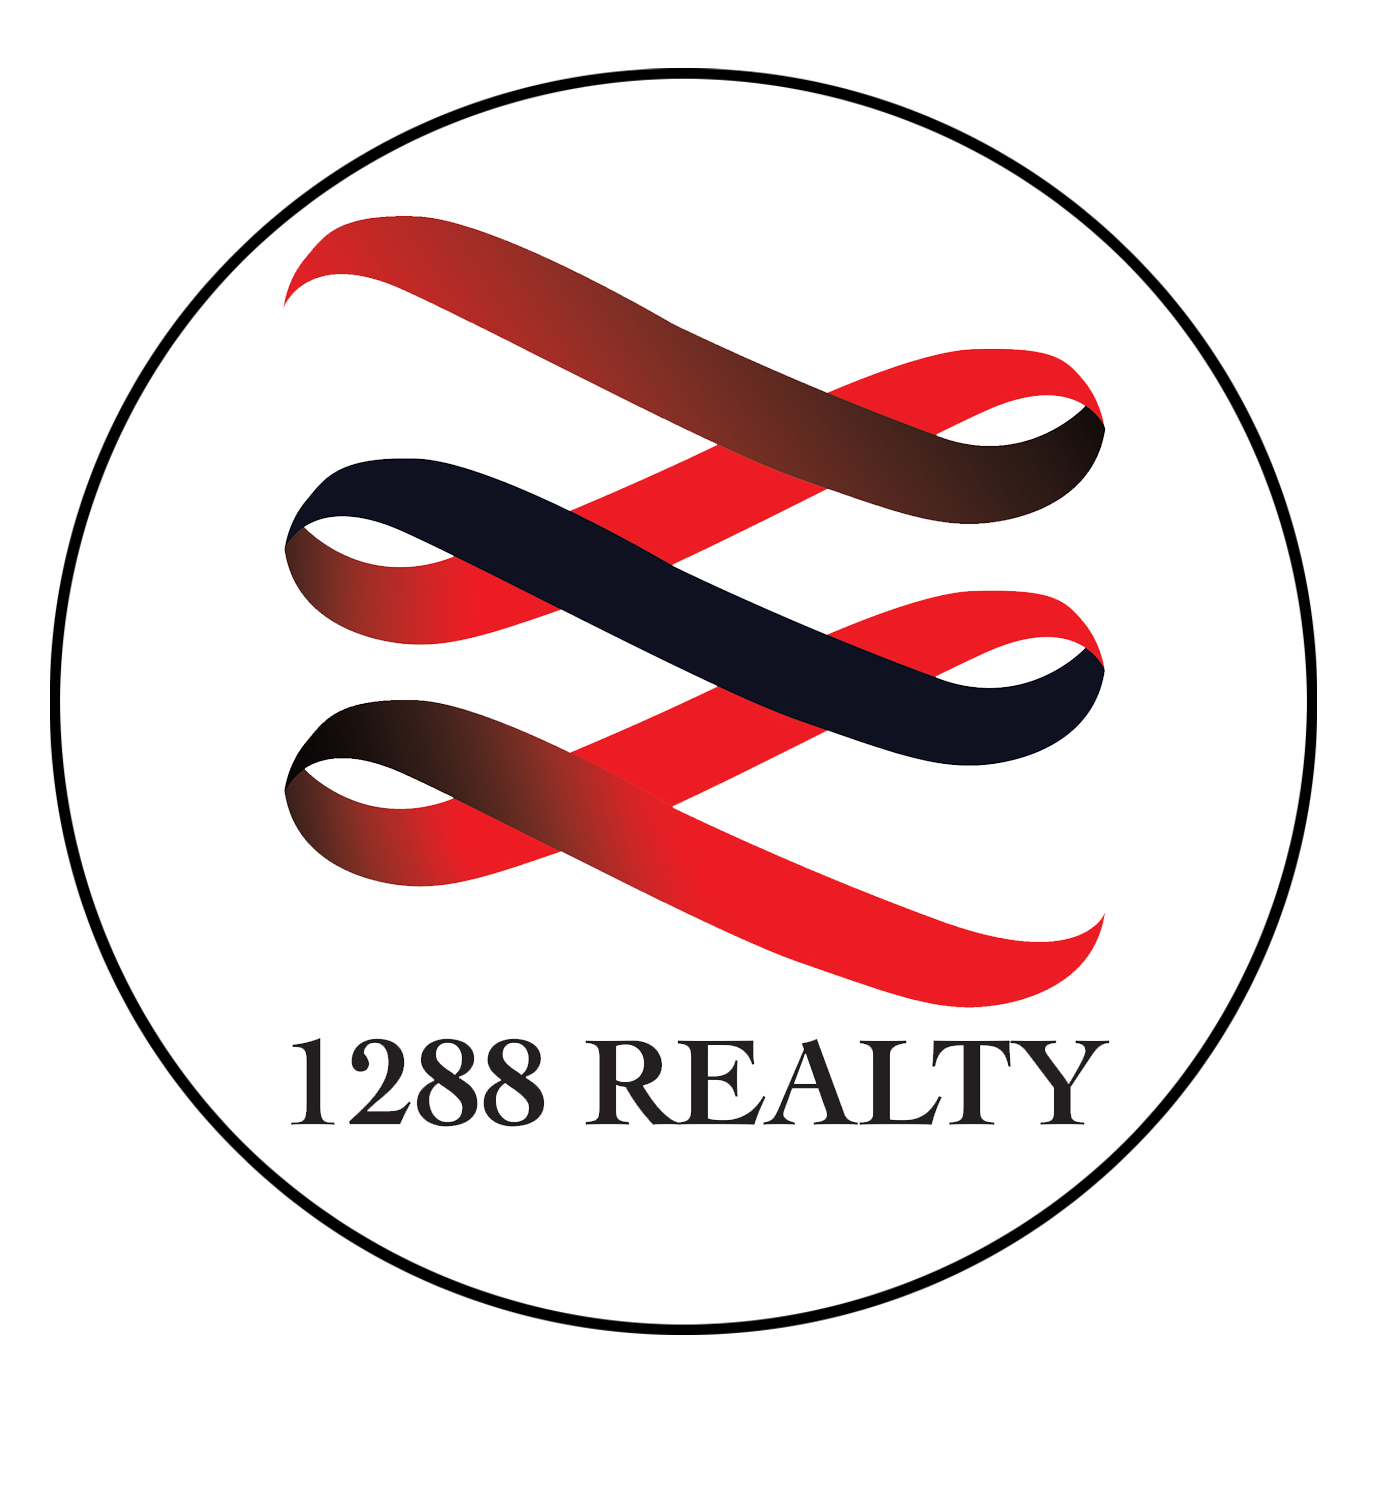 1288 Realty